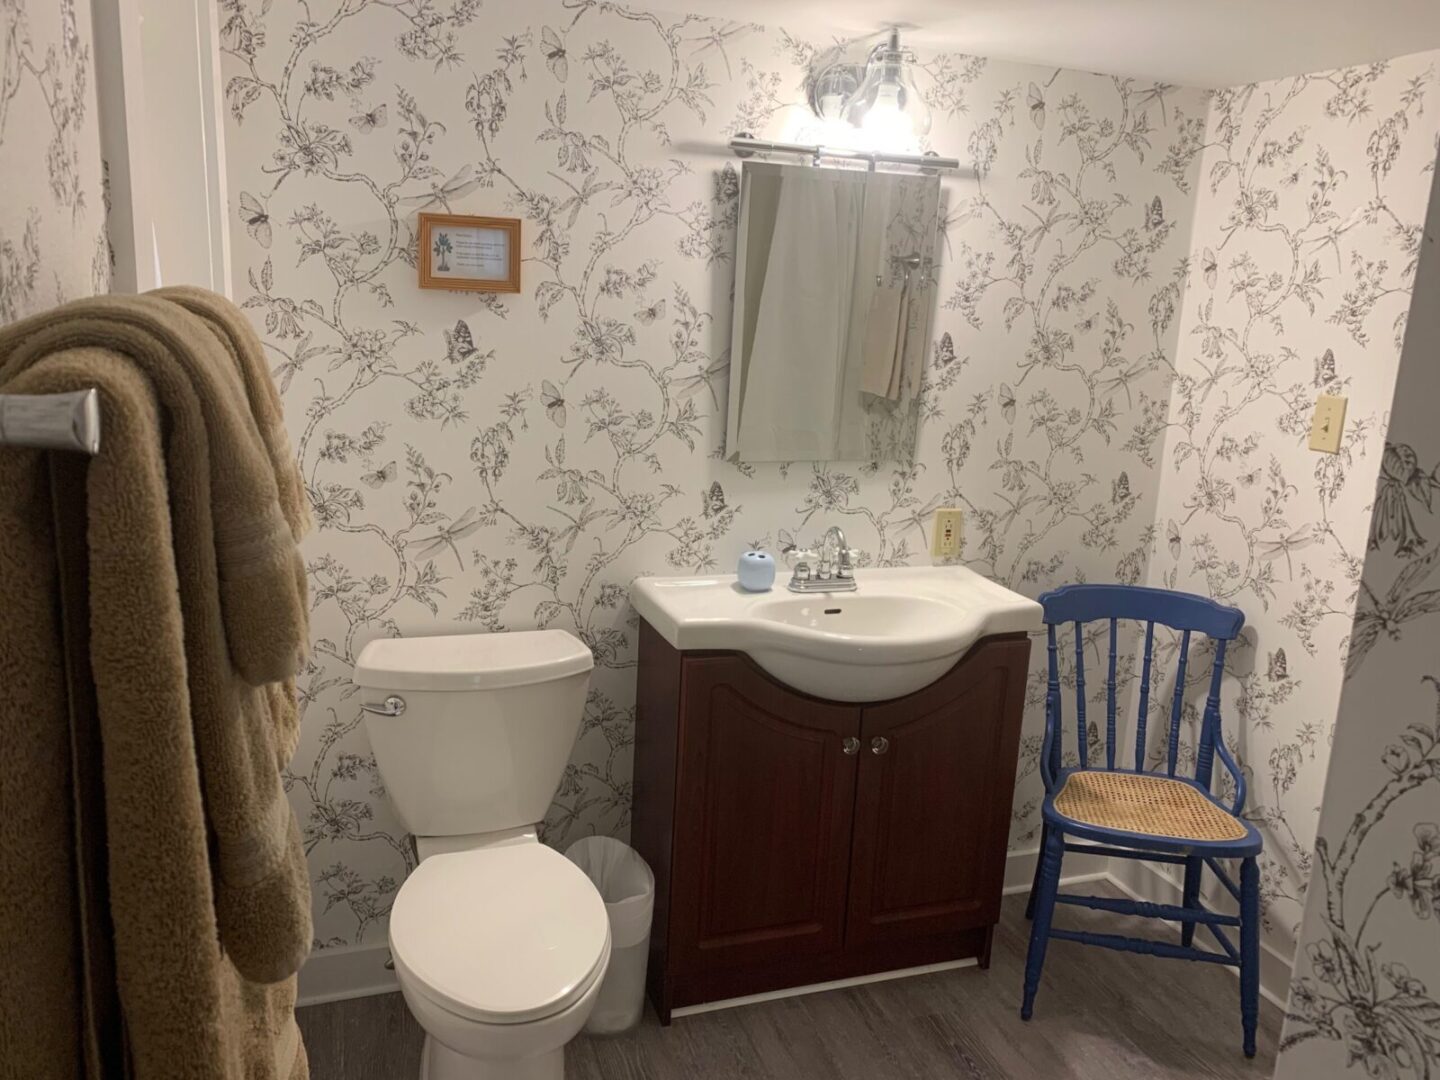 A bathroom with floral wallpaper and a blue chair.